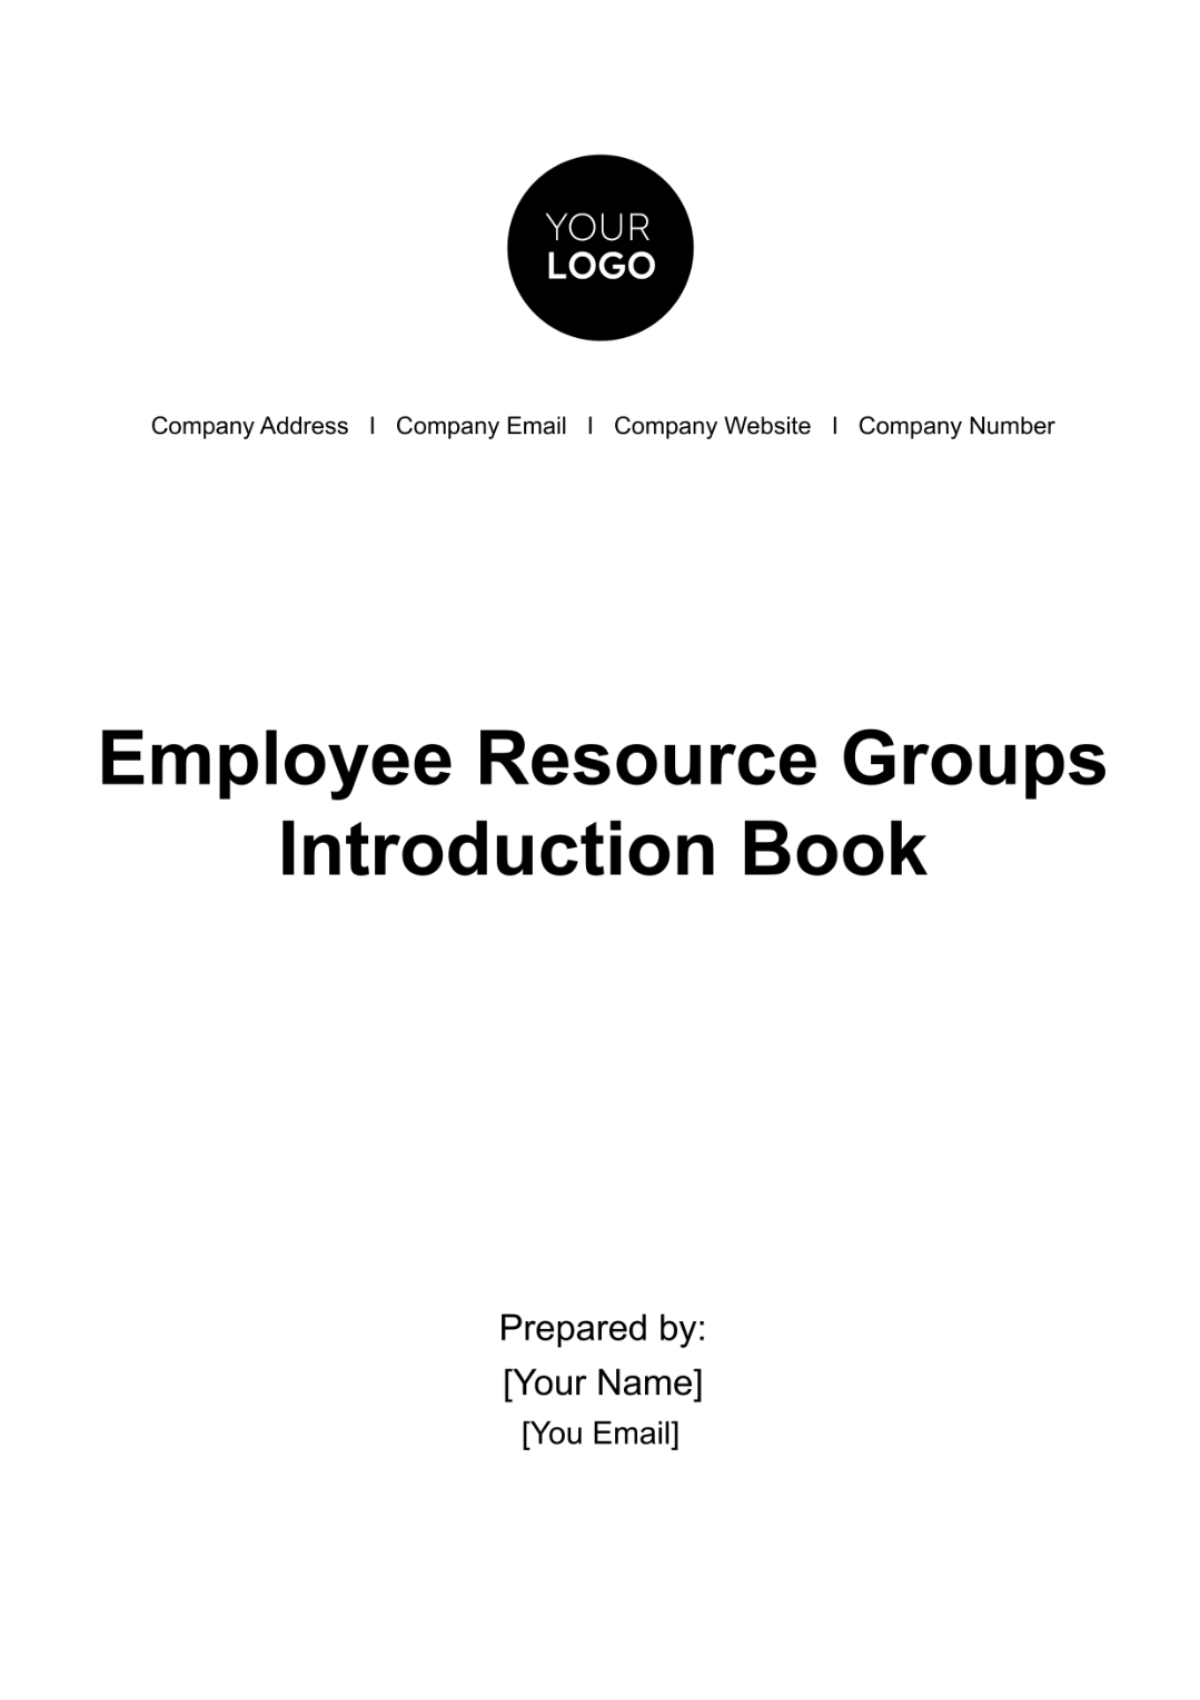 Free Employee Resource Groups Introduction Book HR Template